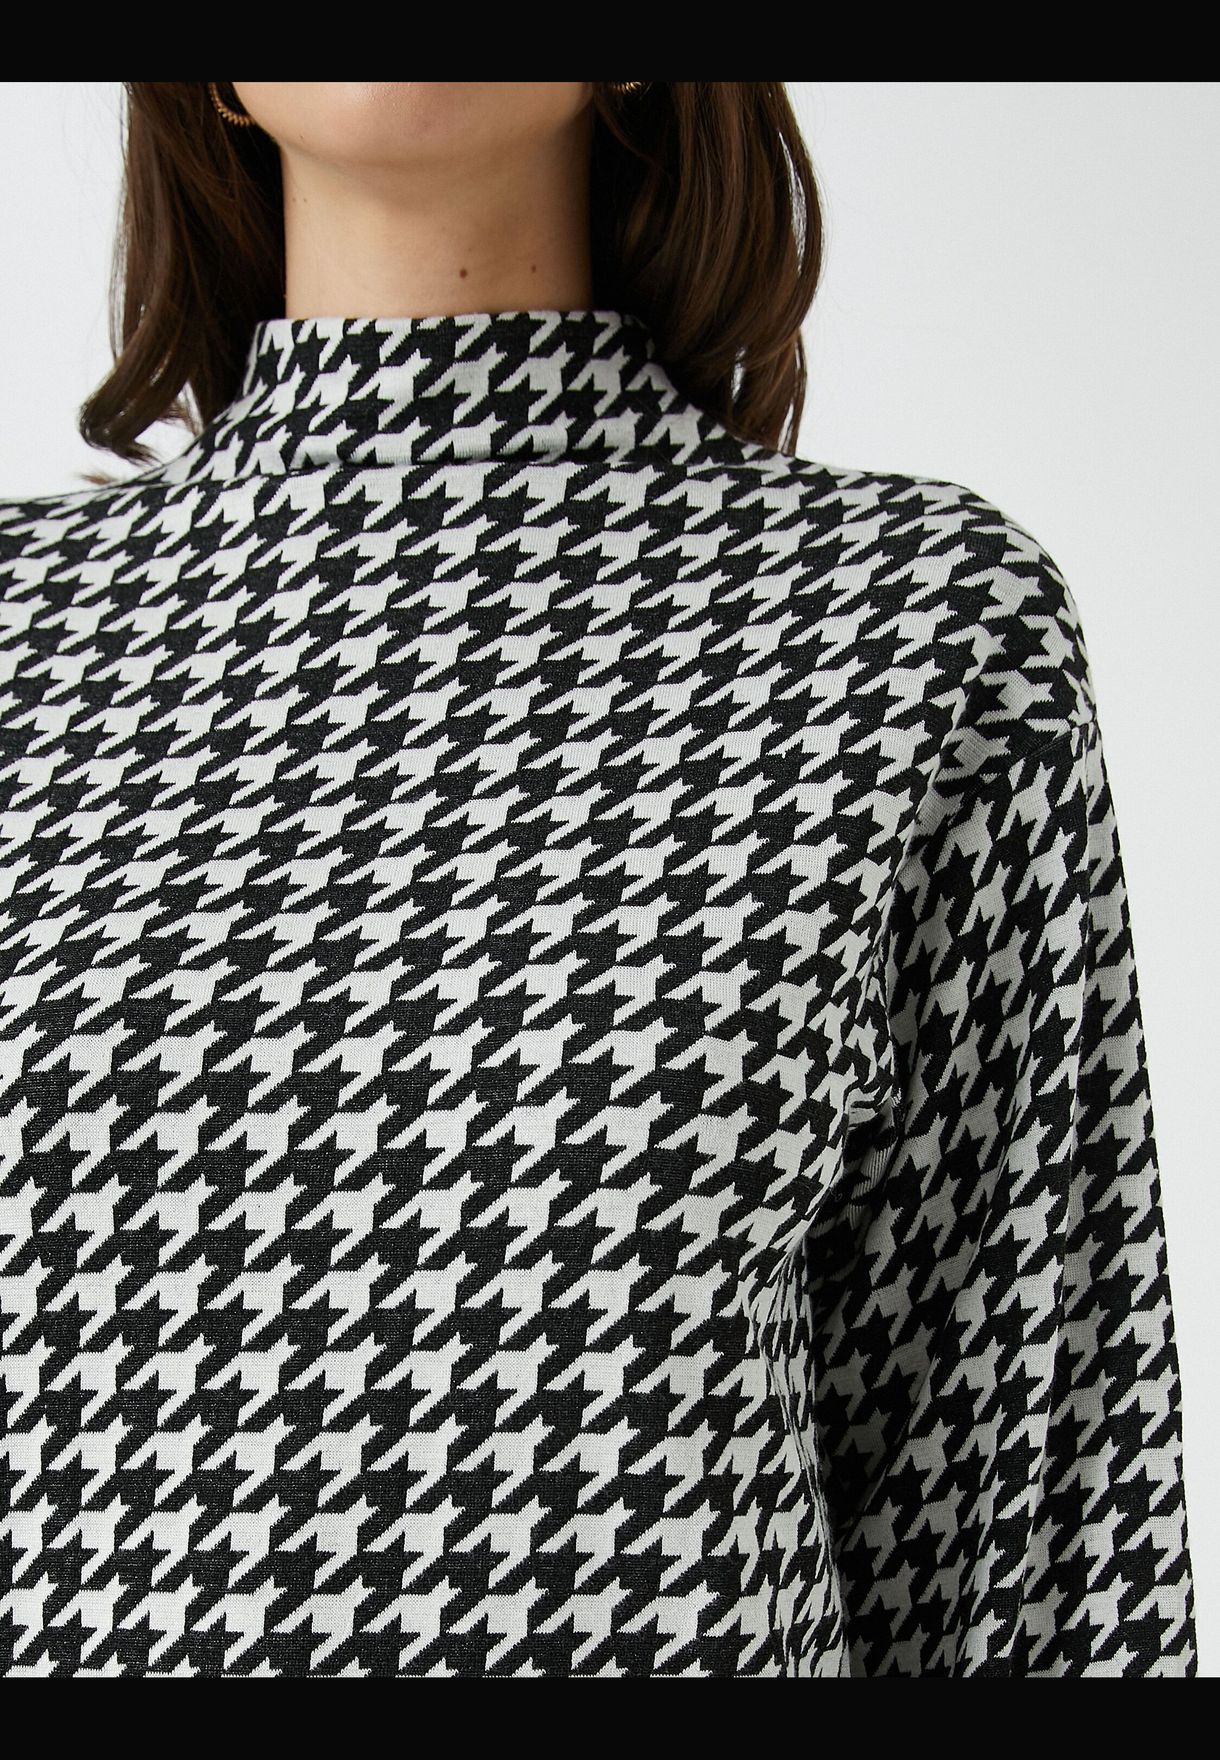 Houndstooth Patterned High Neck Sweater